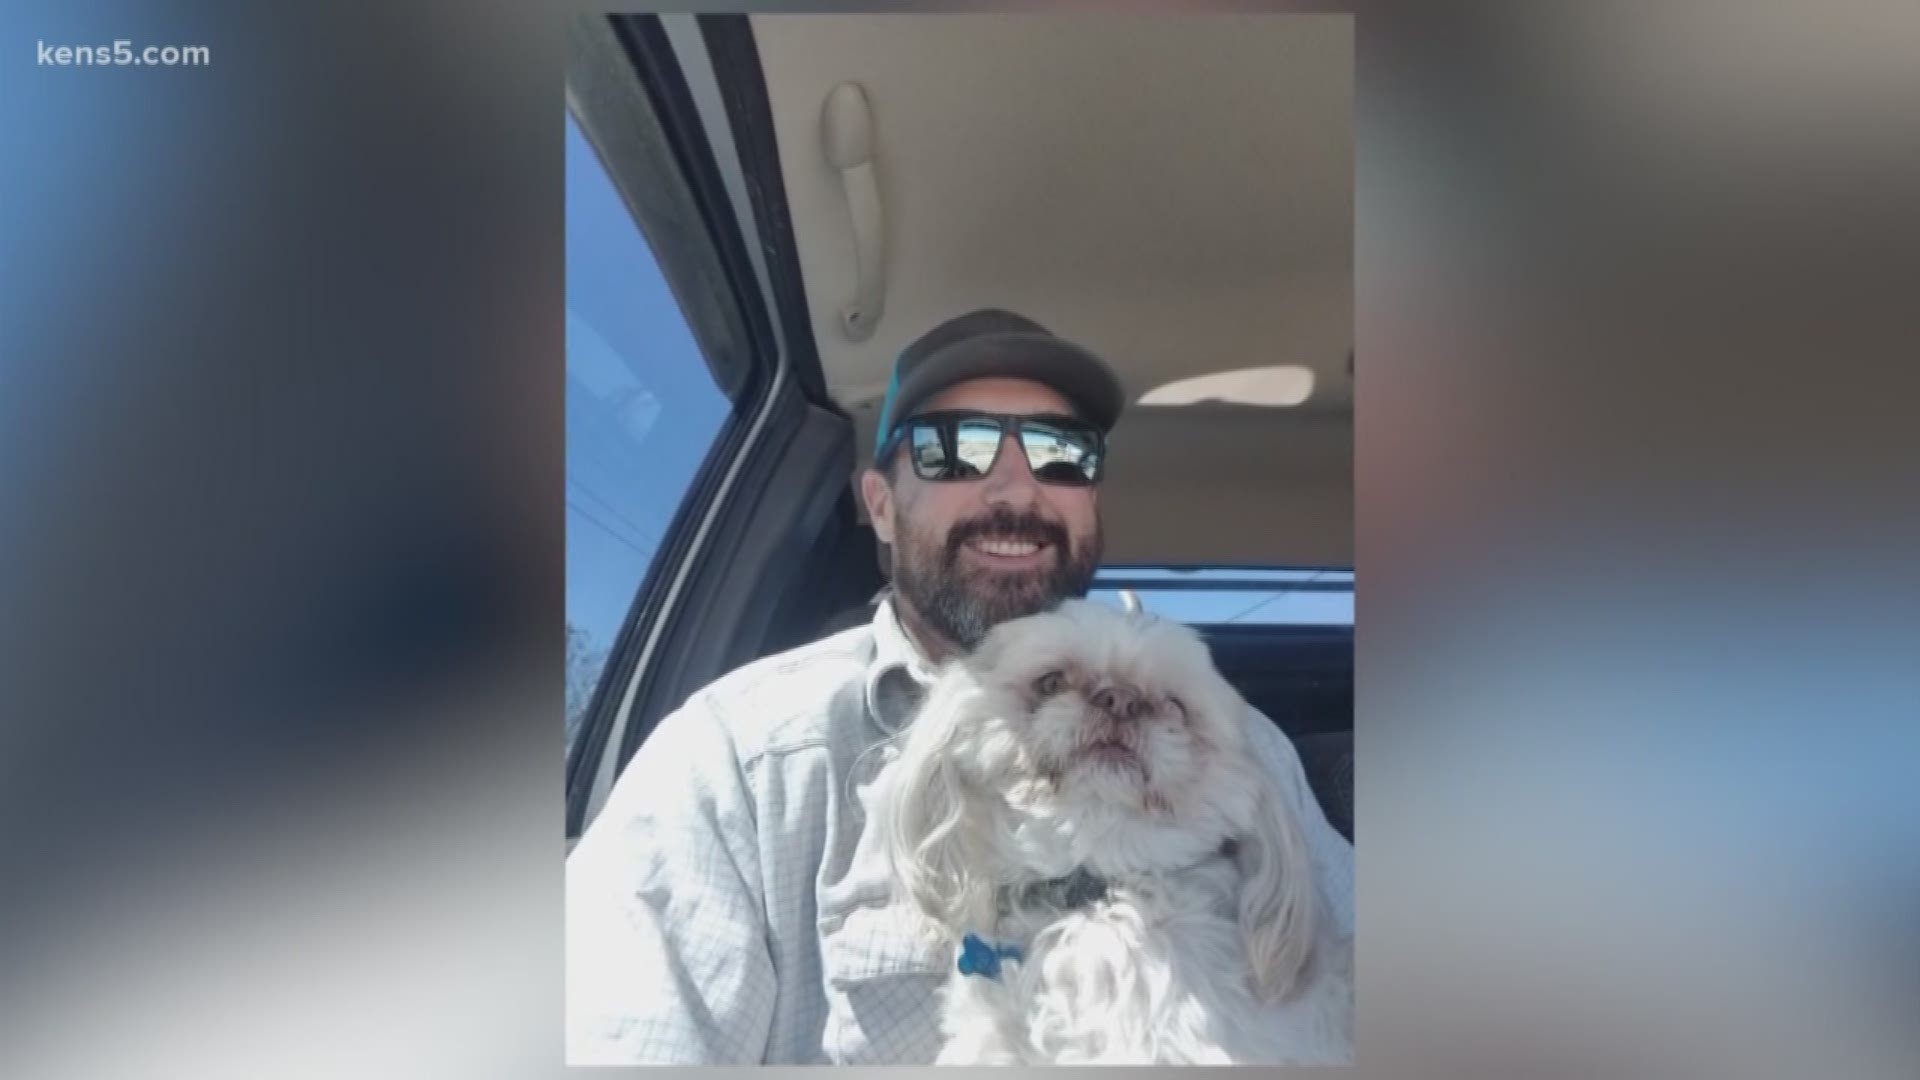 It's been about a week since Joe Bailey came home and noticed his dog was missing just a day later he would find that animal's body stuffed in a sack about 400 yards from his home. Eyewitness News reporter Adi Guajardo has more.